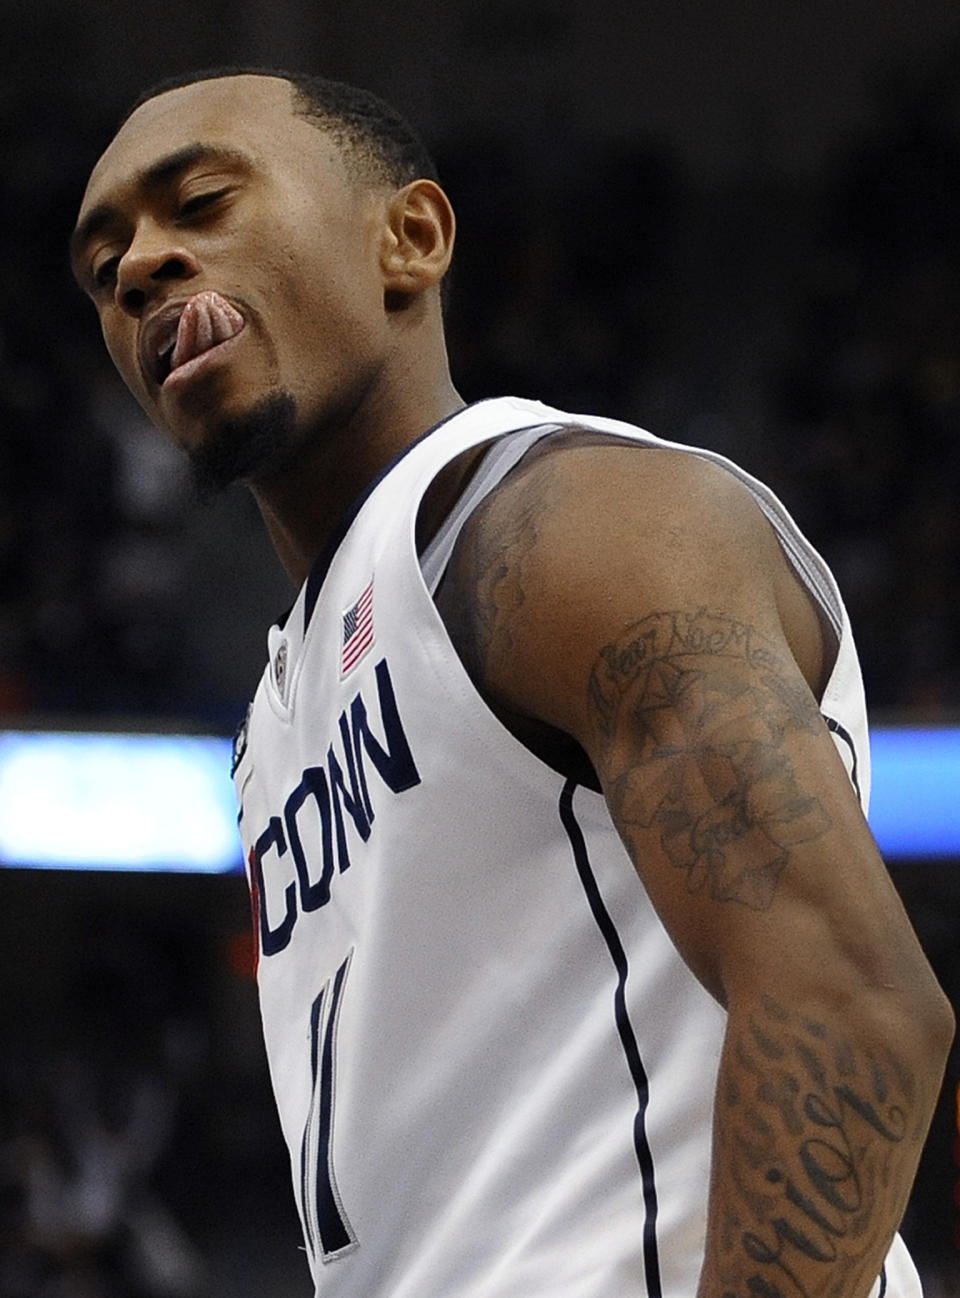 Connecticut's Ryan Boatright reacts after a basket during the second half of an NCAA college basketball game against Syracuse in Hartford, Conn., Wednesday, Feb. 13, 2013. Connecticut won 66-58. (AP Photo/Jessica Hill)